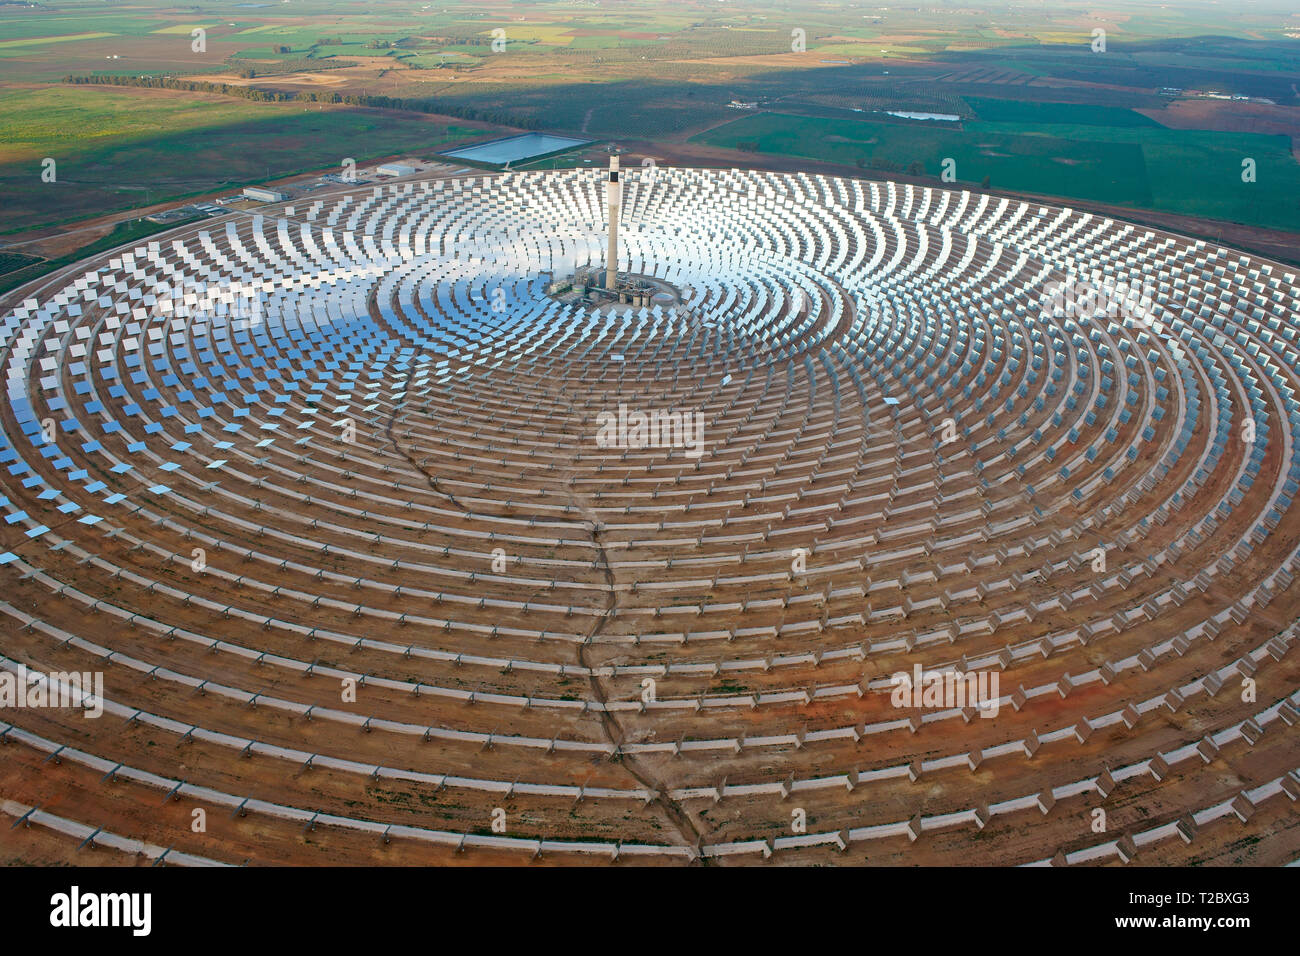 AERIAL VIEW. Field of heliostats and its heat collecting central tower. Gemasolar Thermasolar Plant, Fuentes de Andalucia, Andalusia, Spain. Stock Photo